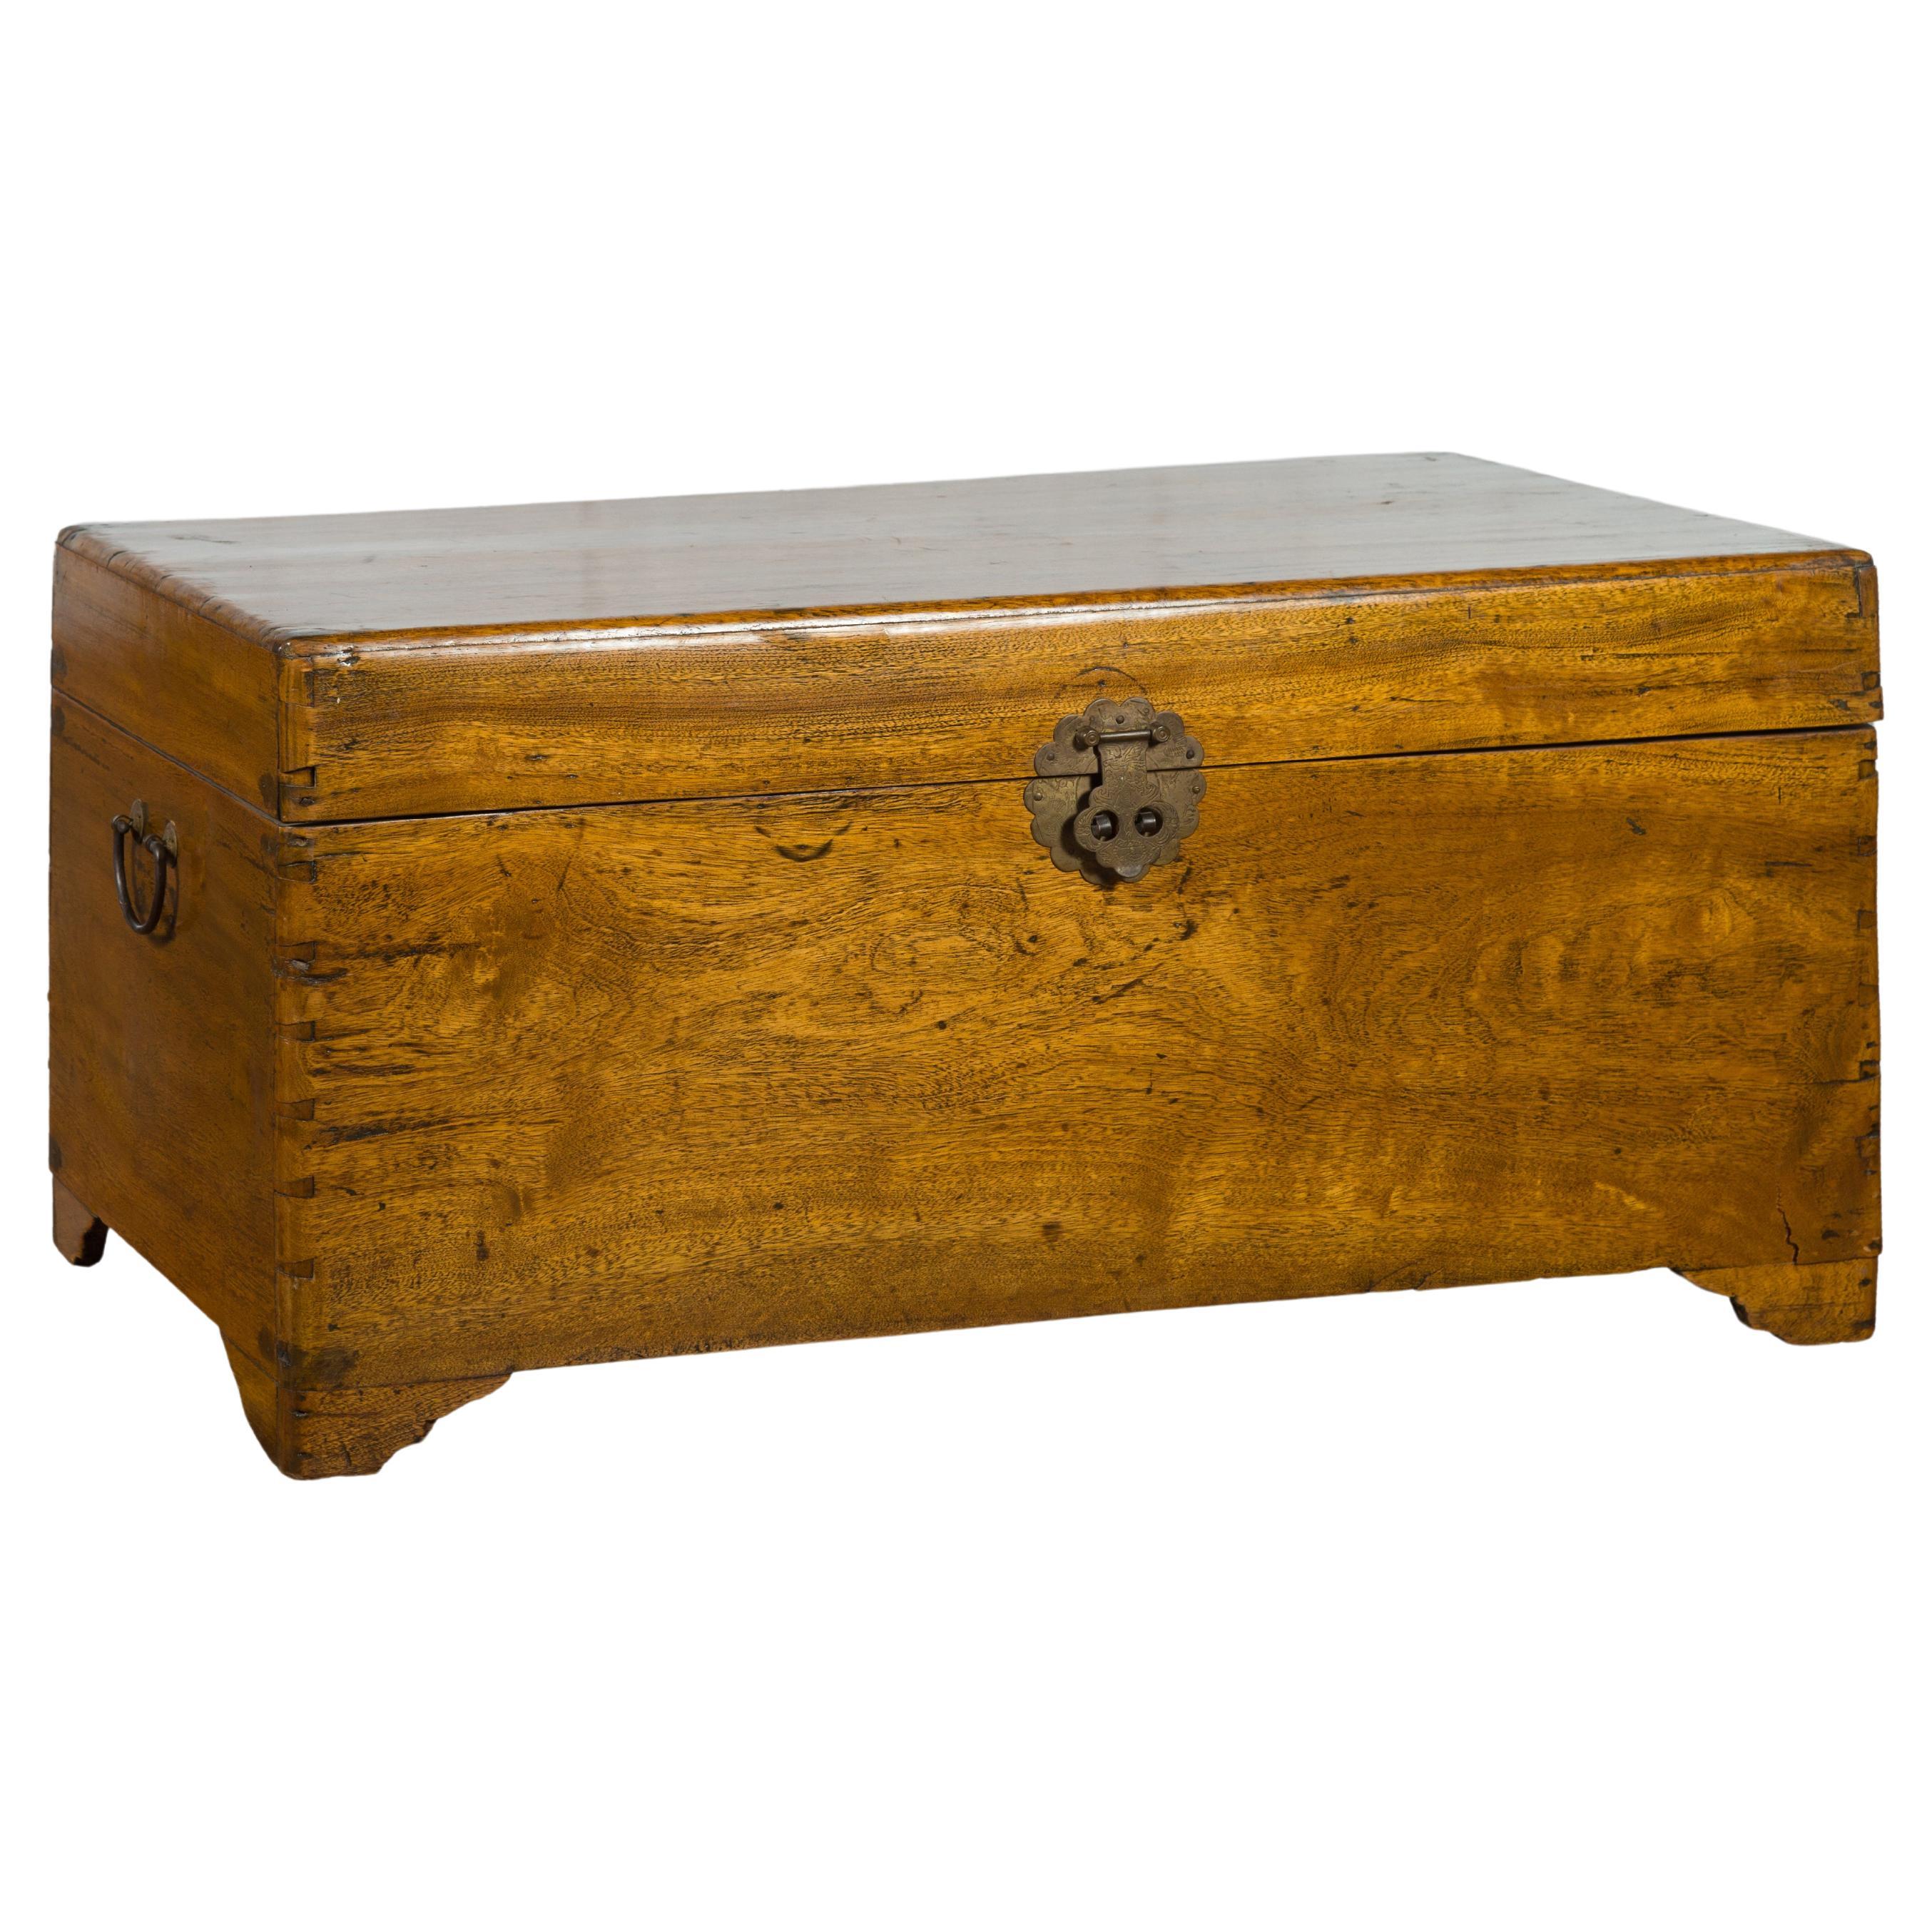 Where do camphor chests come from?